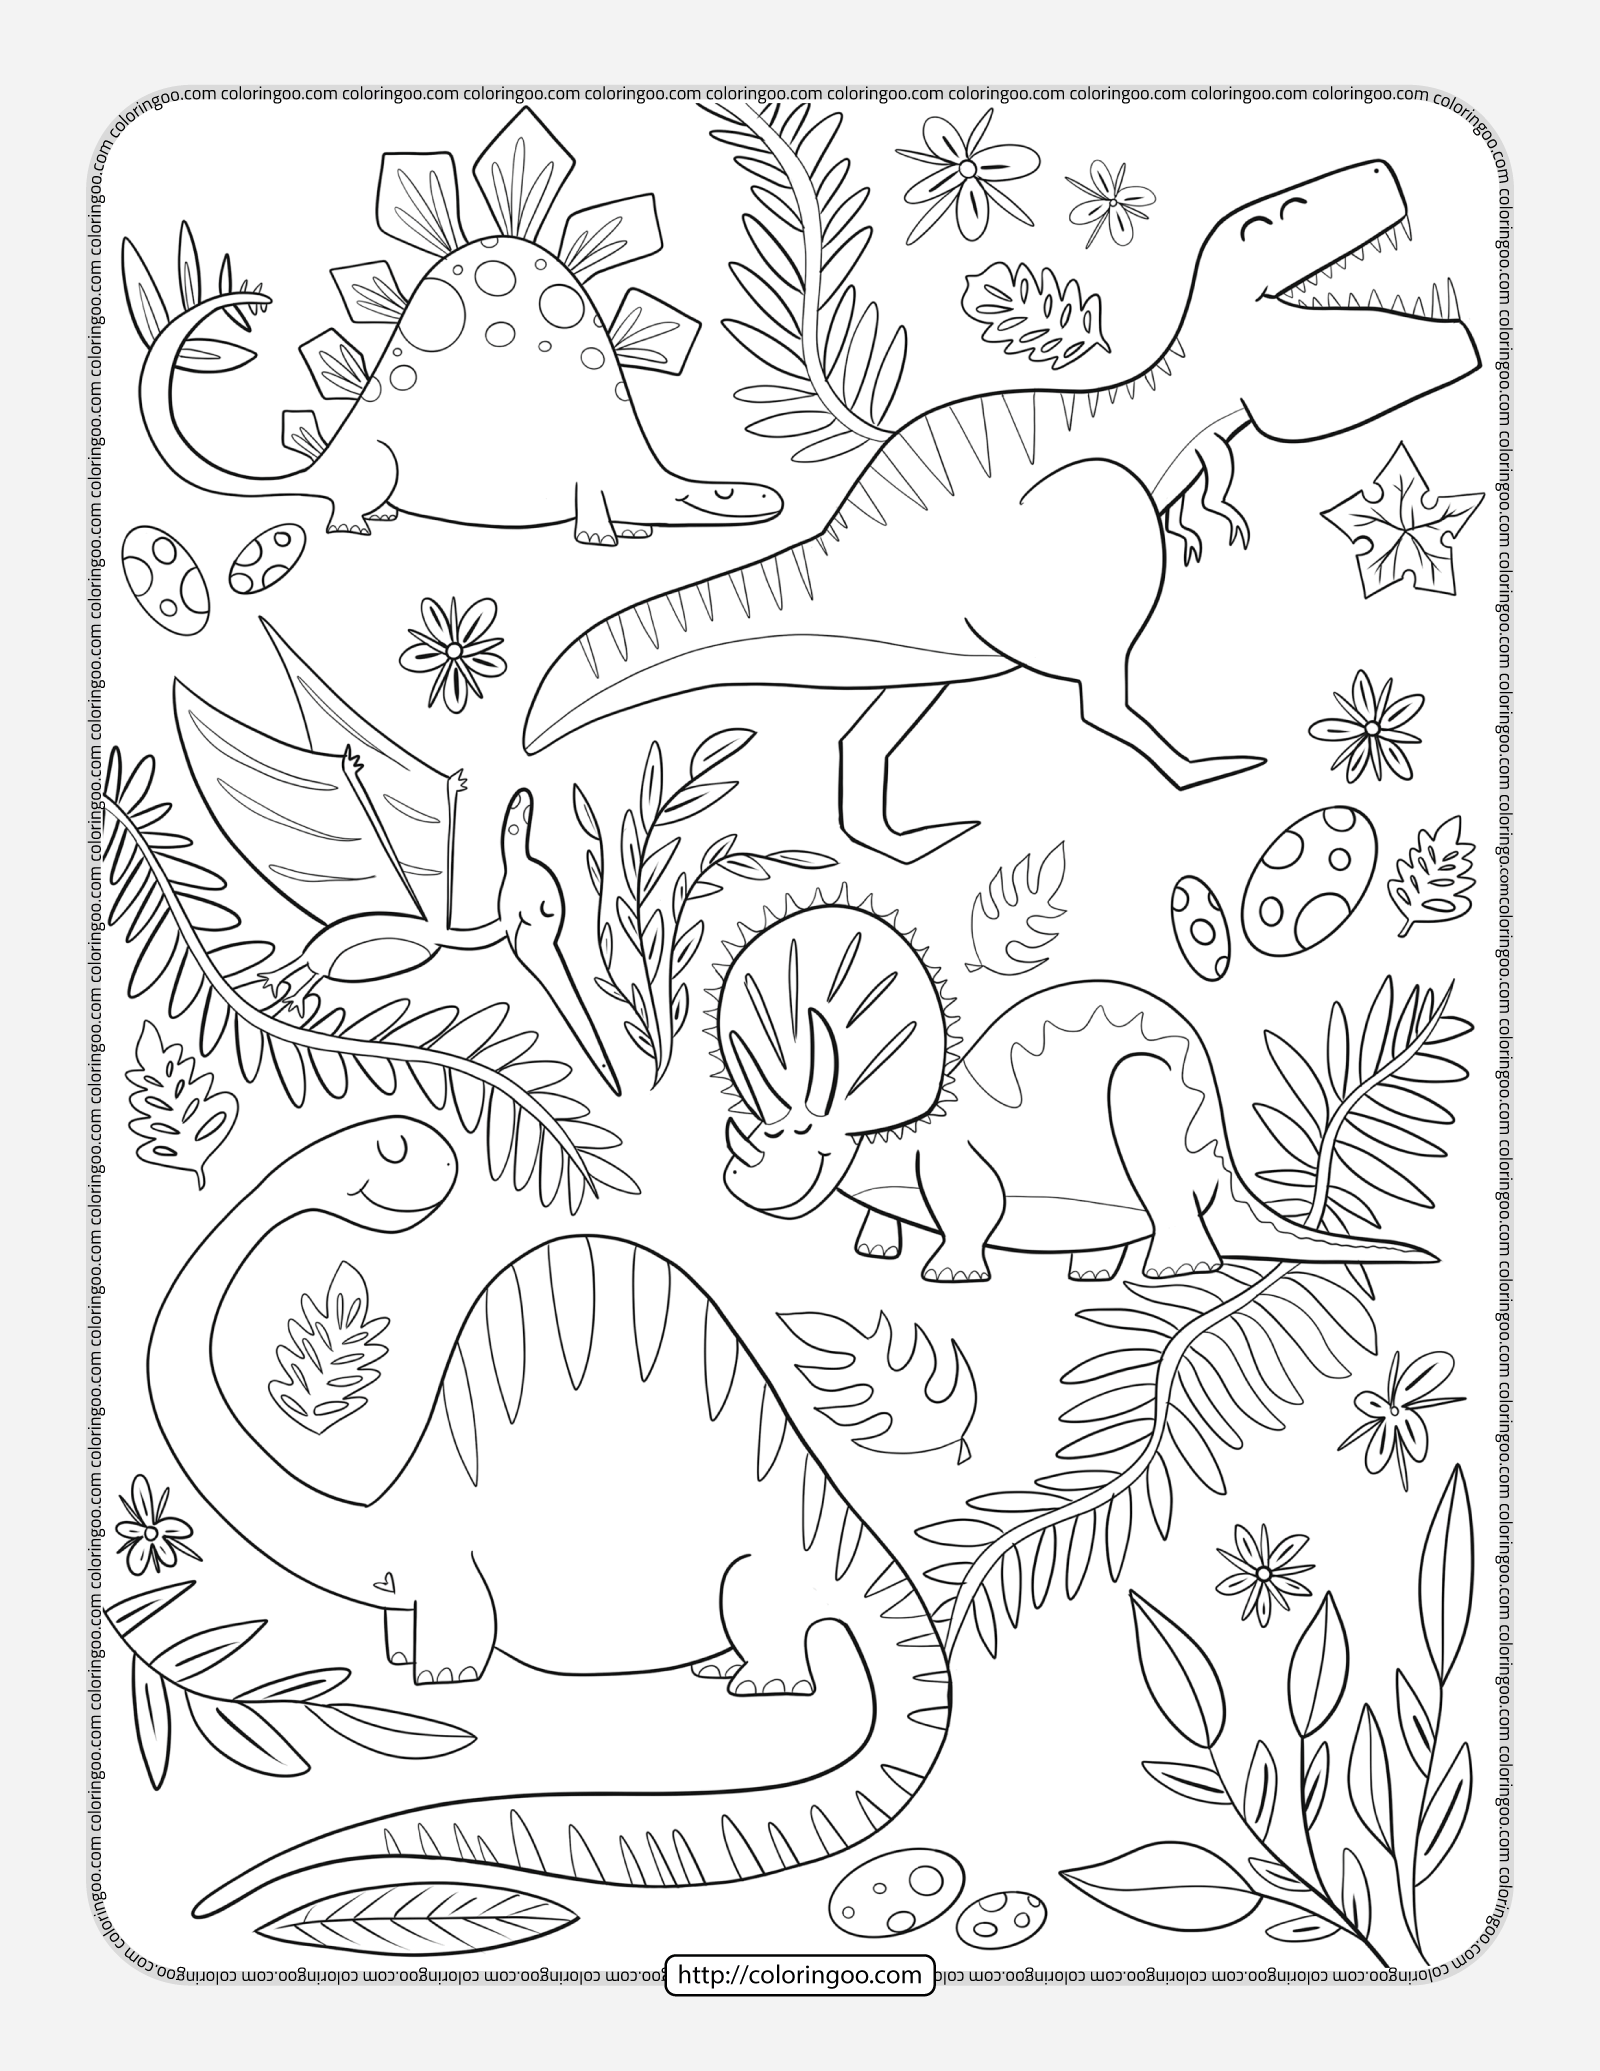 dinosaurs doodle pdf coloring page